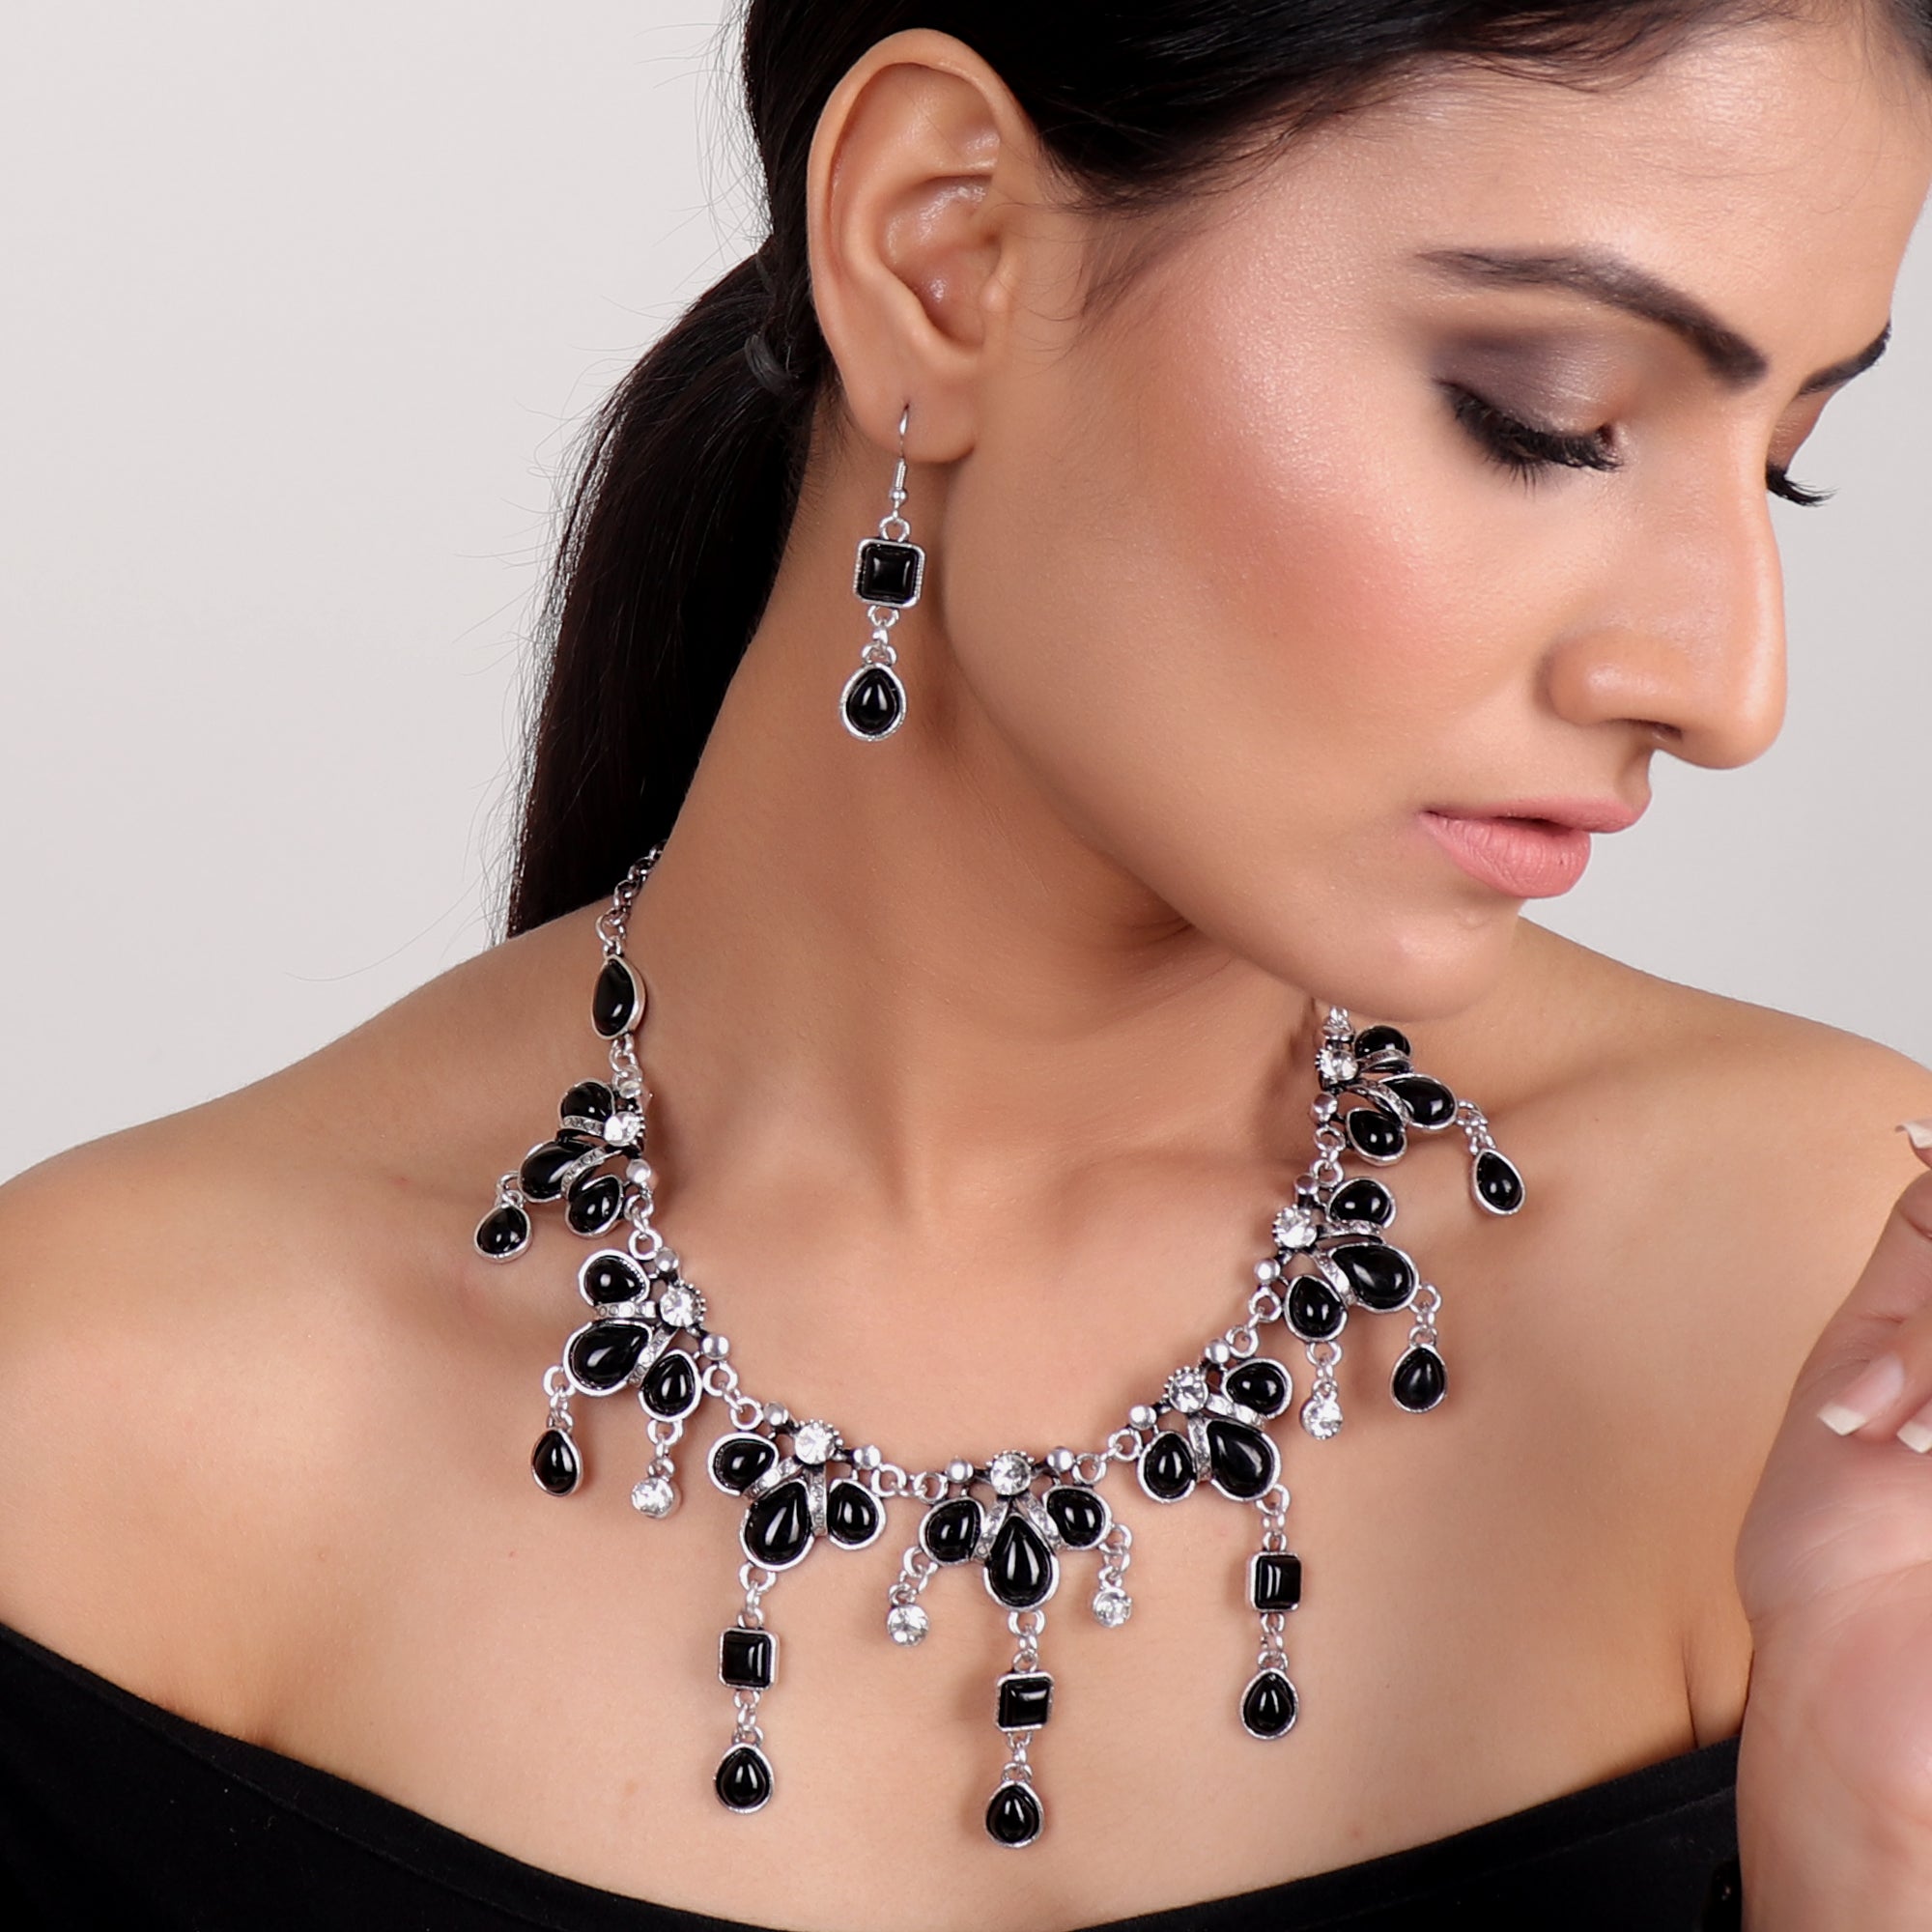 Necklace and Earring set with Crystals- Black – Gifts and Fashion